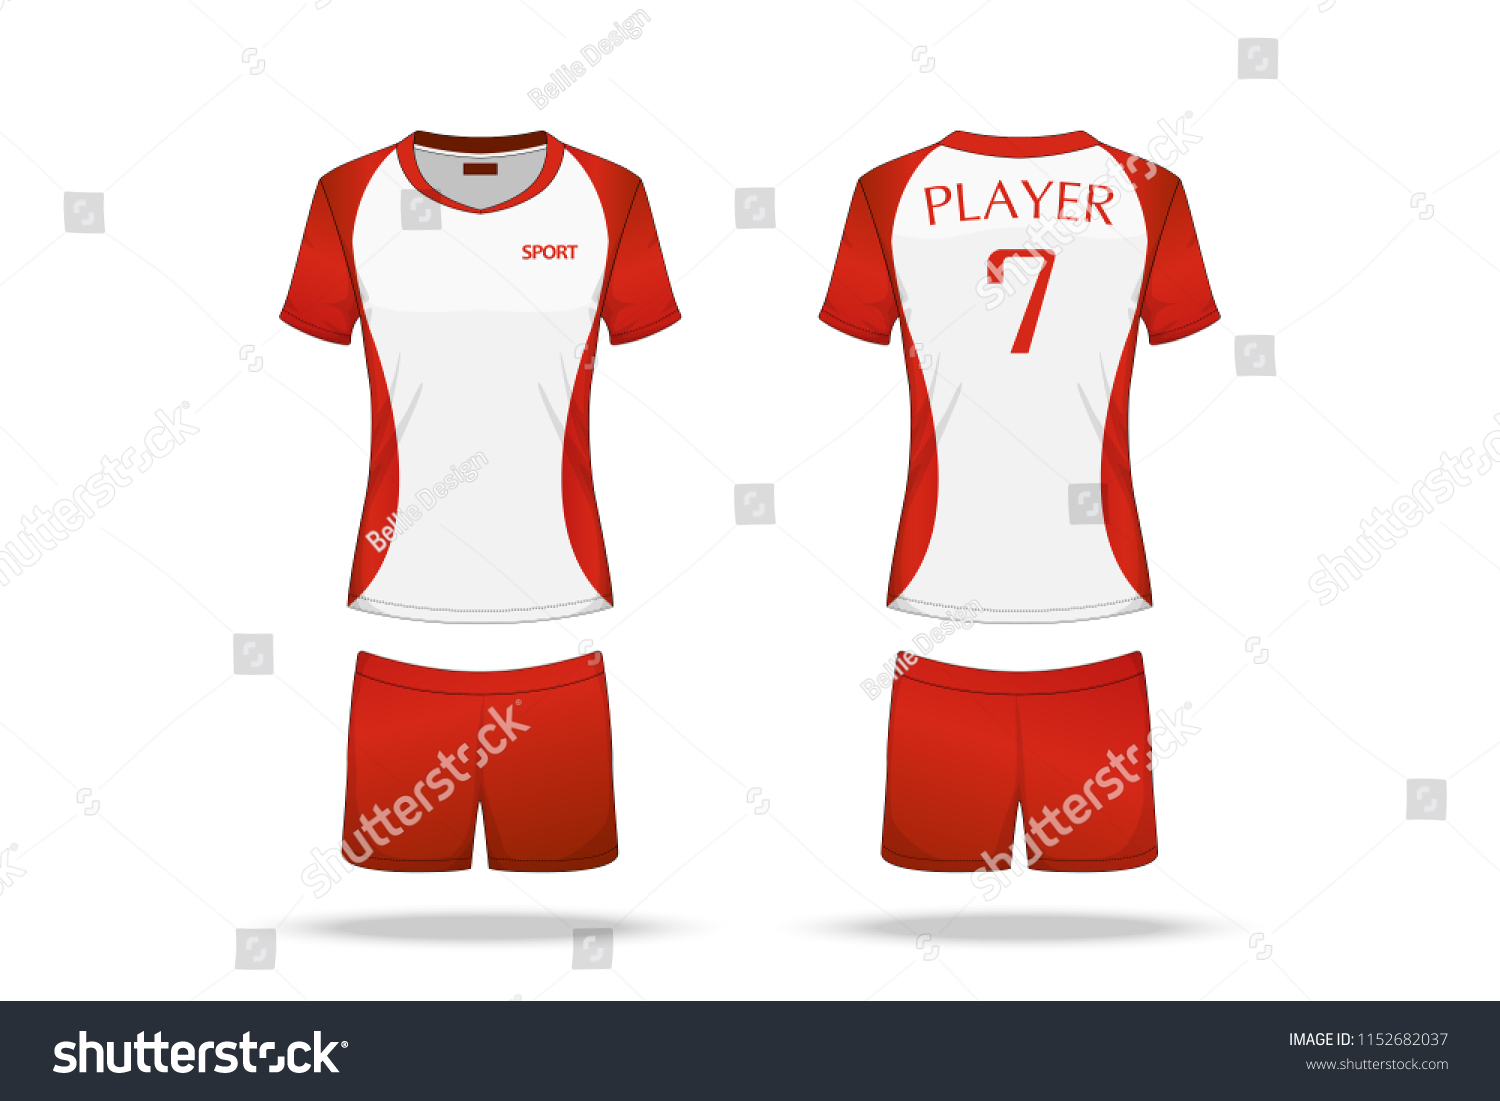 volleyball jersey layout maker